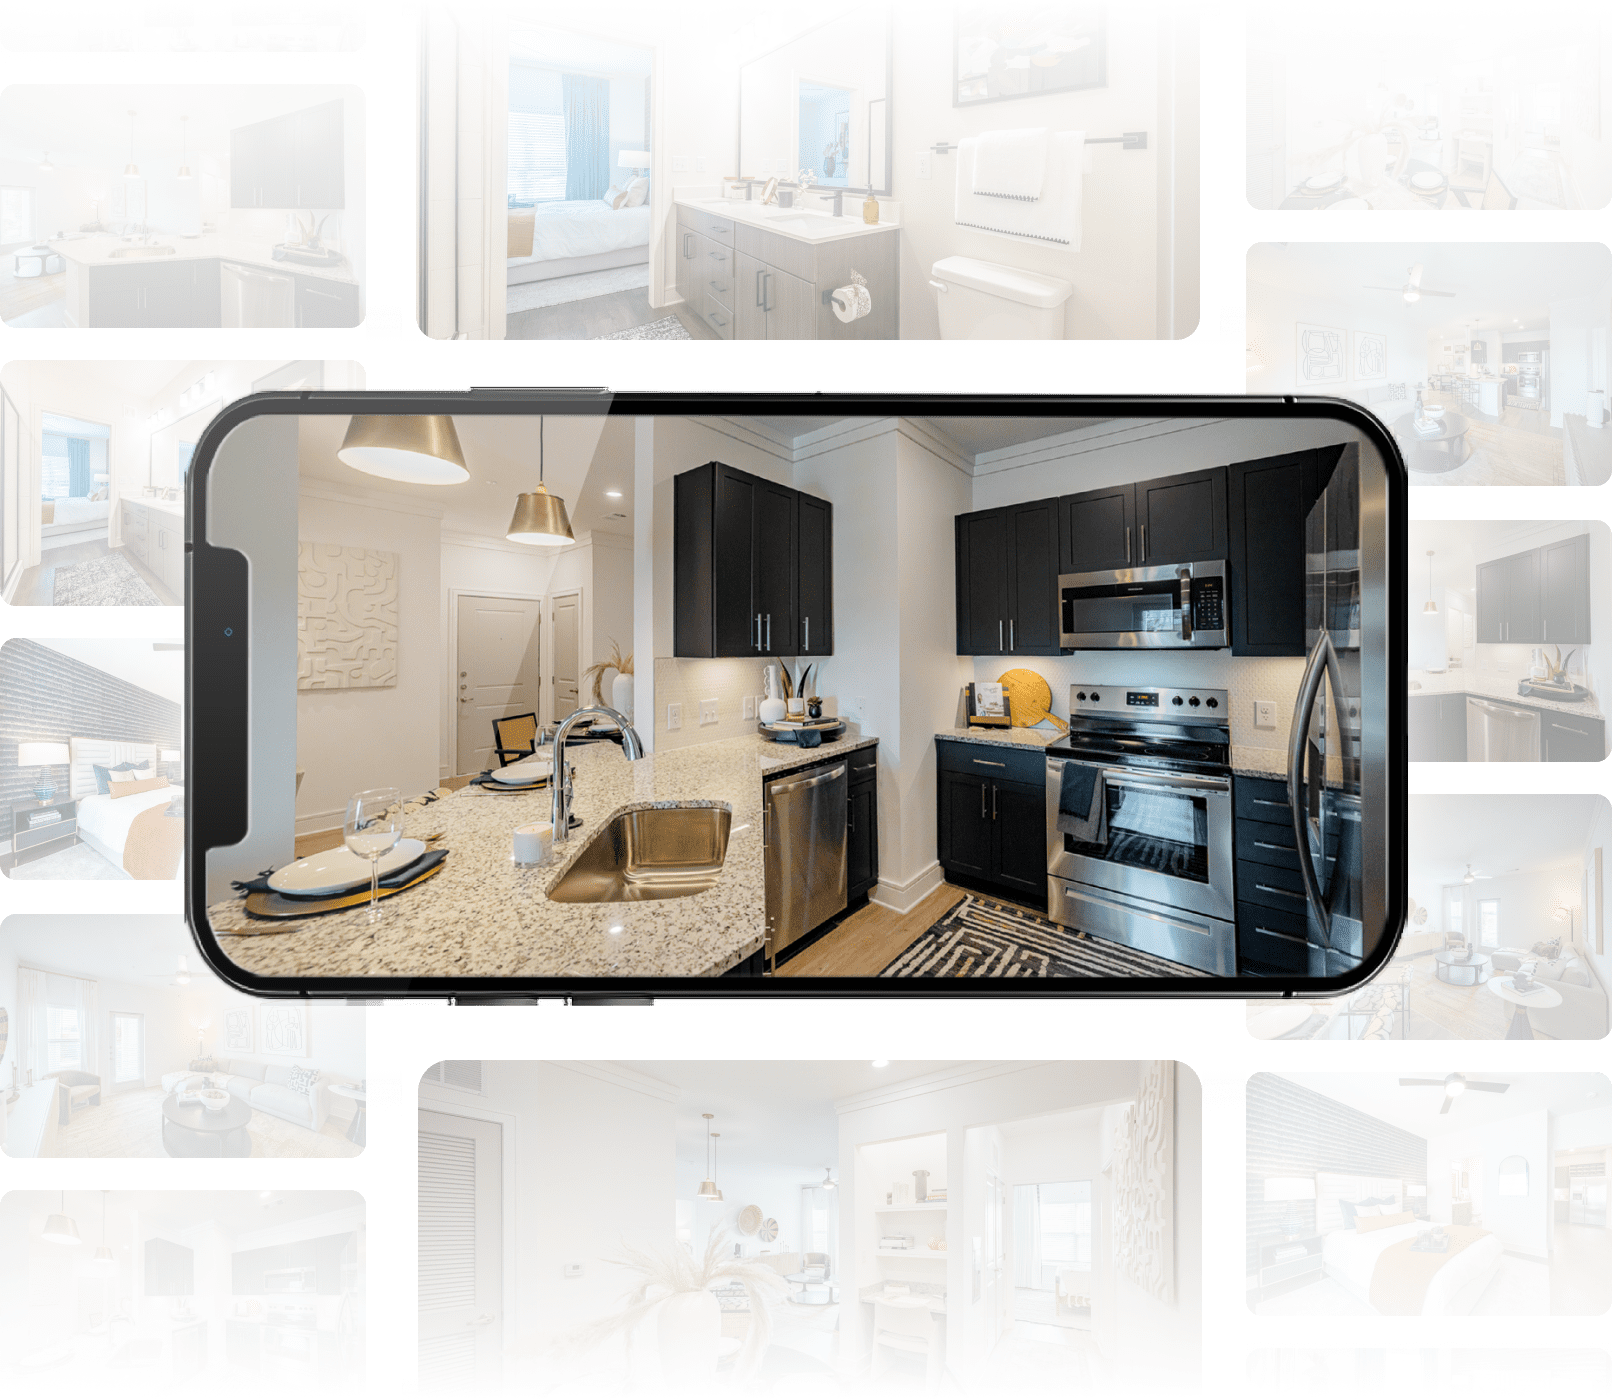 Collage of photos from apartment units with a mobile device highlighting a kitchen image.